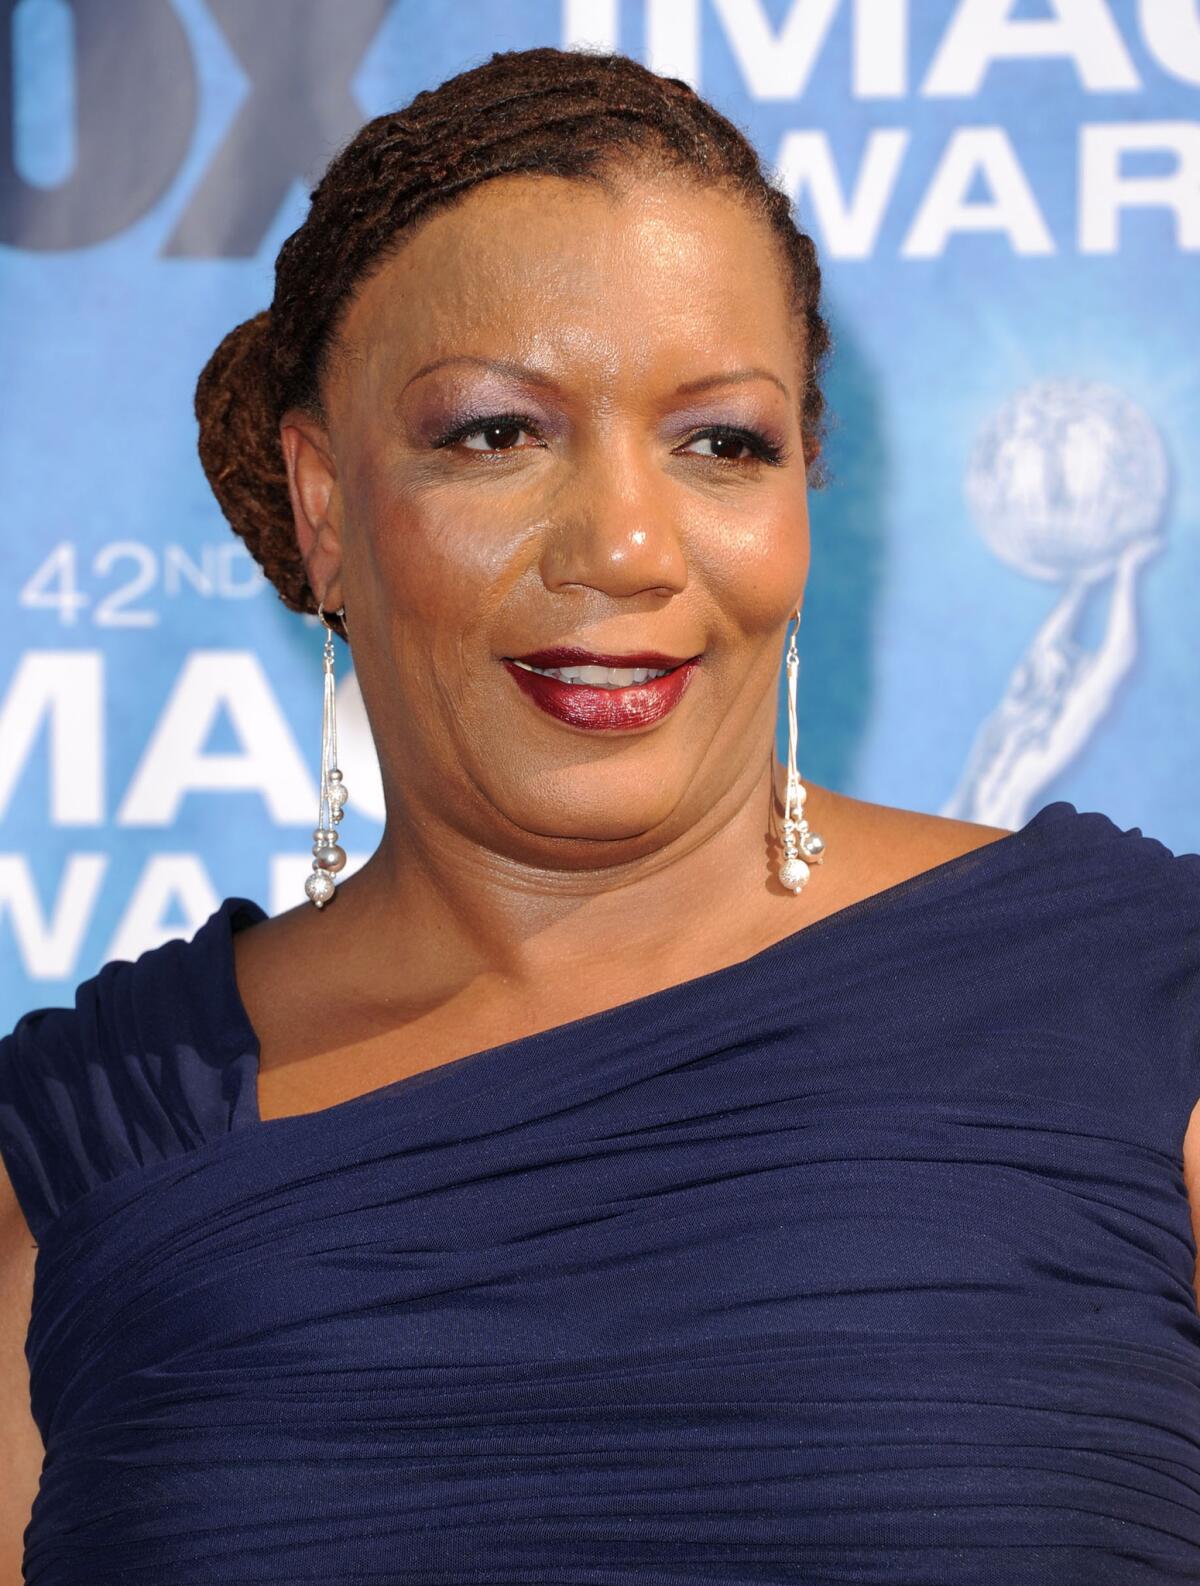 Bernice McFadden at the 42nd NAACP Image Awards held in March 2011 in Los Angeles.